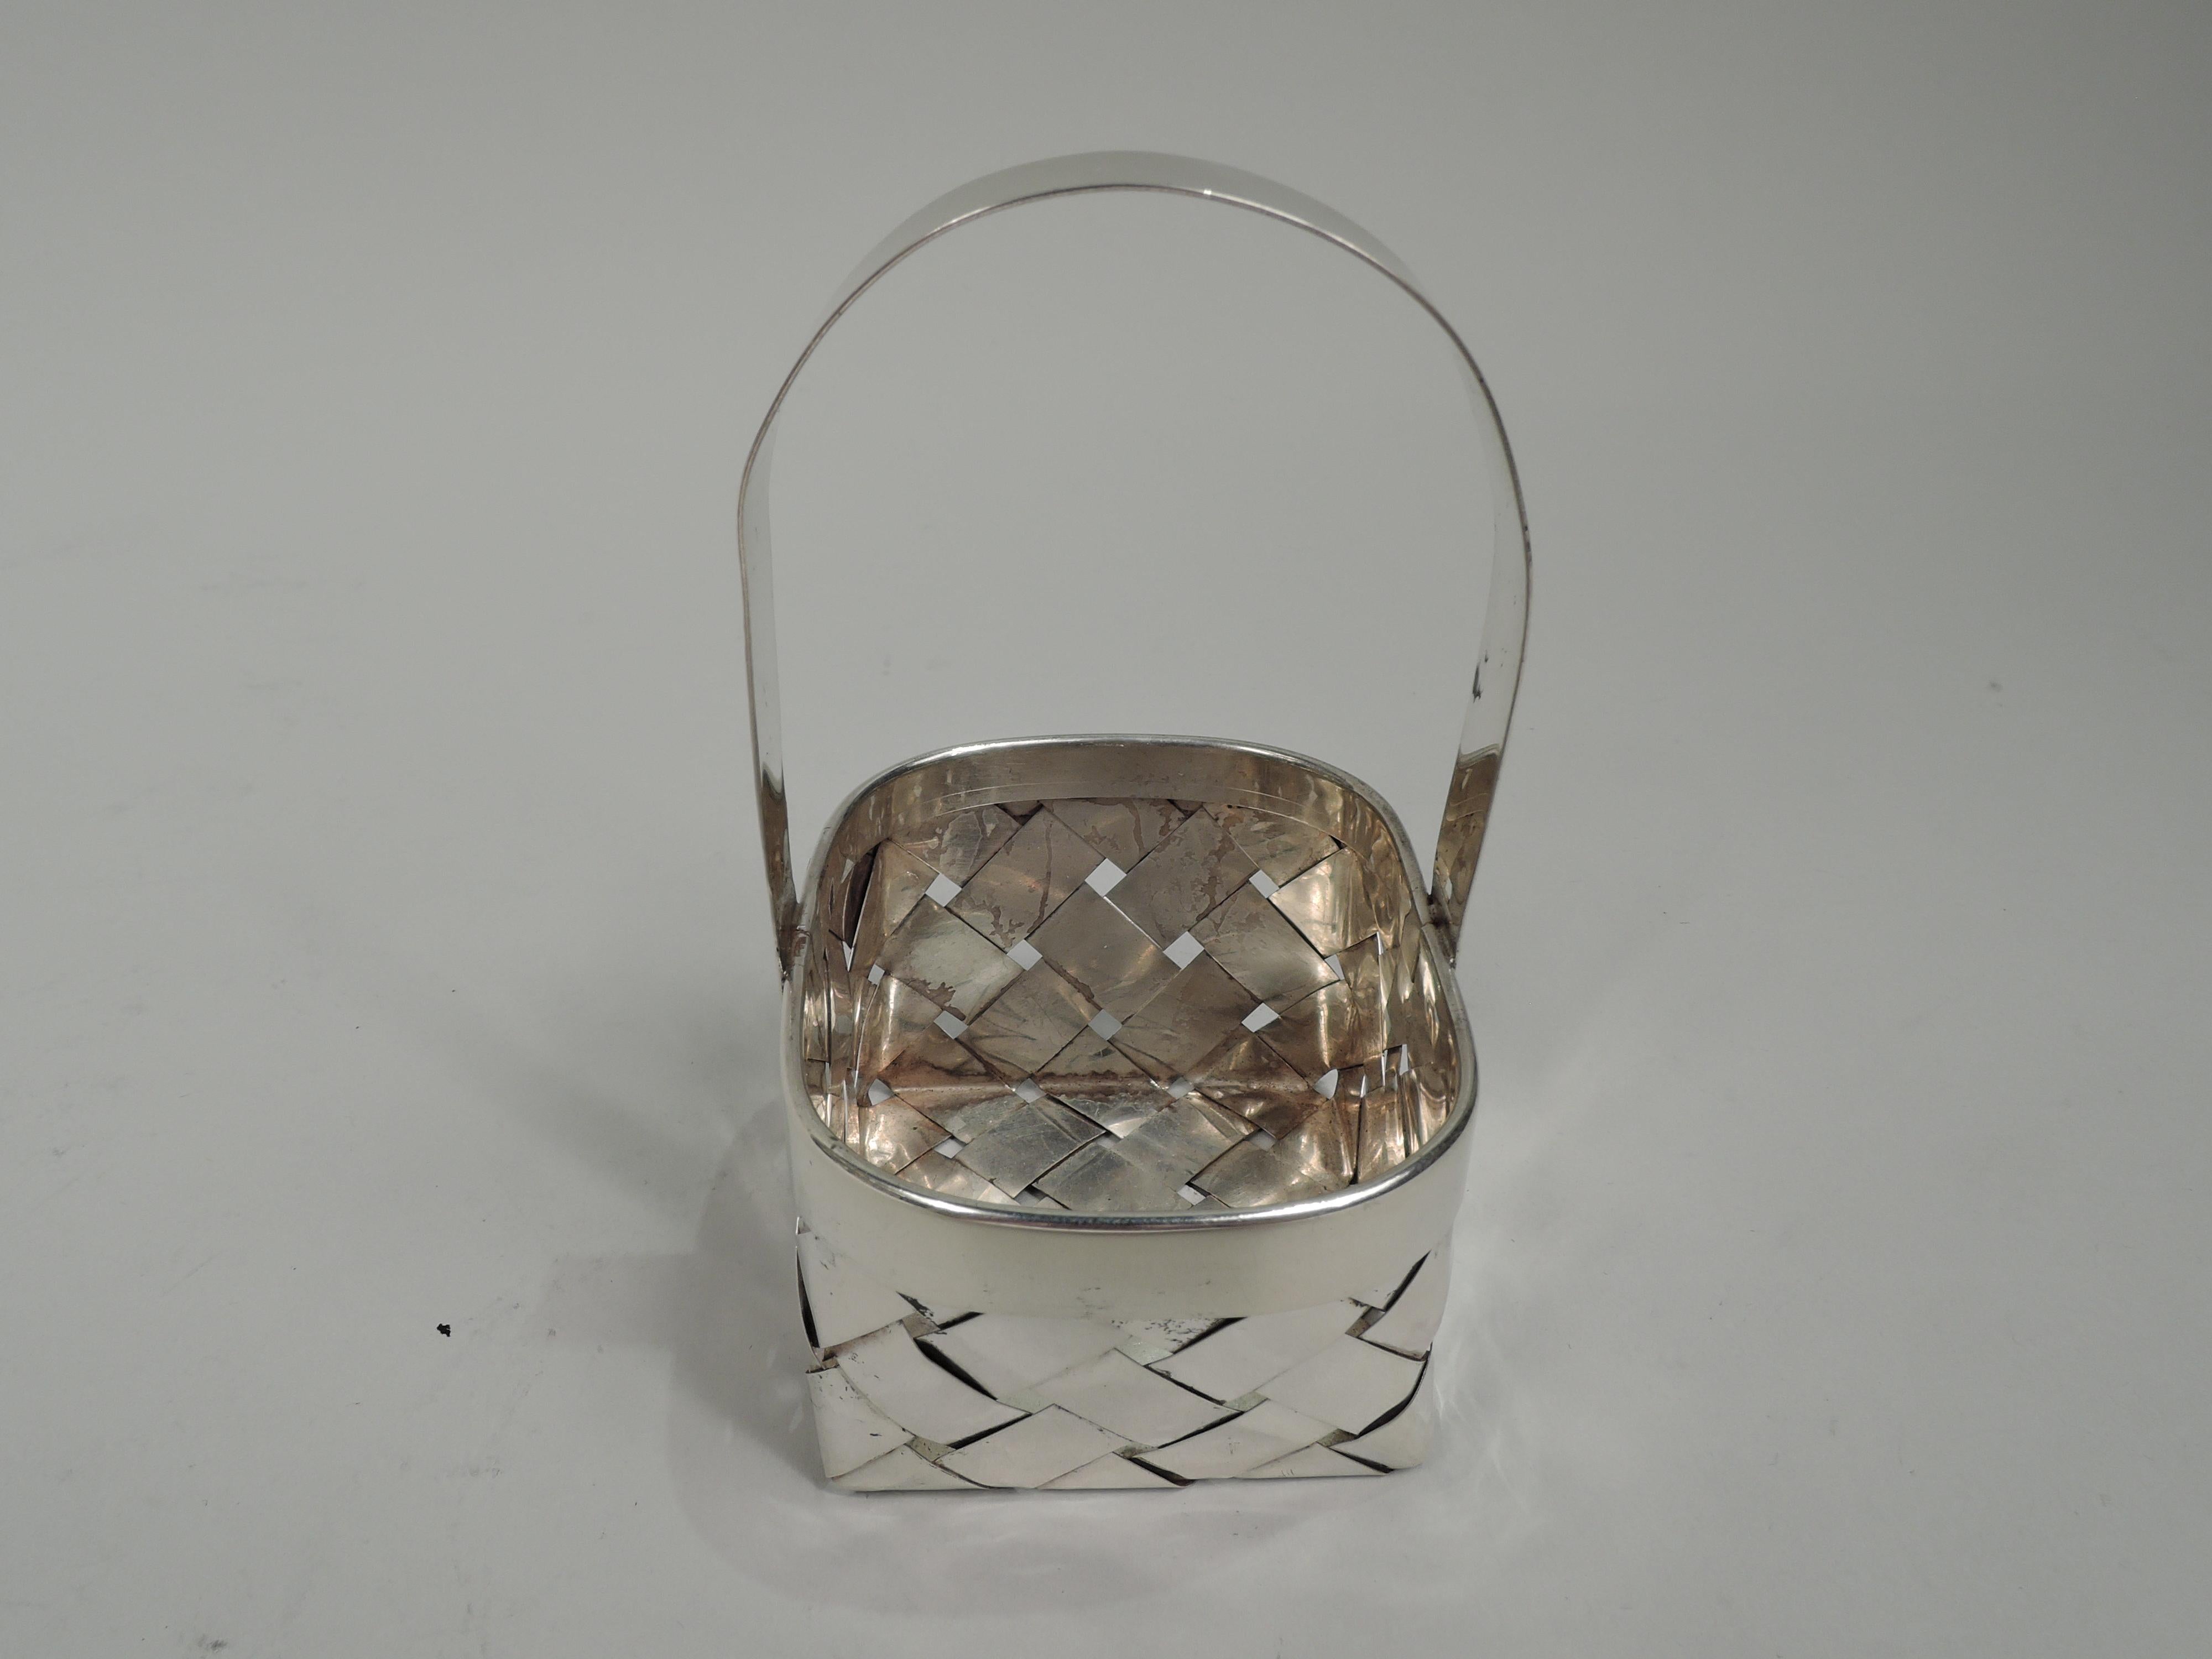 American Mid-Century Modern sterling silver basket. Rectangular with straight sides and curved ends. Plain rim and fixed and high c-scroll handle. Woven strips. Marked “Sterling”. Weight: 1.6 troy ounces.